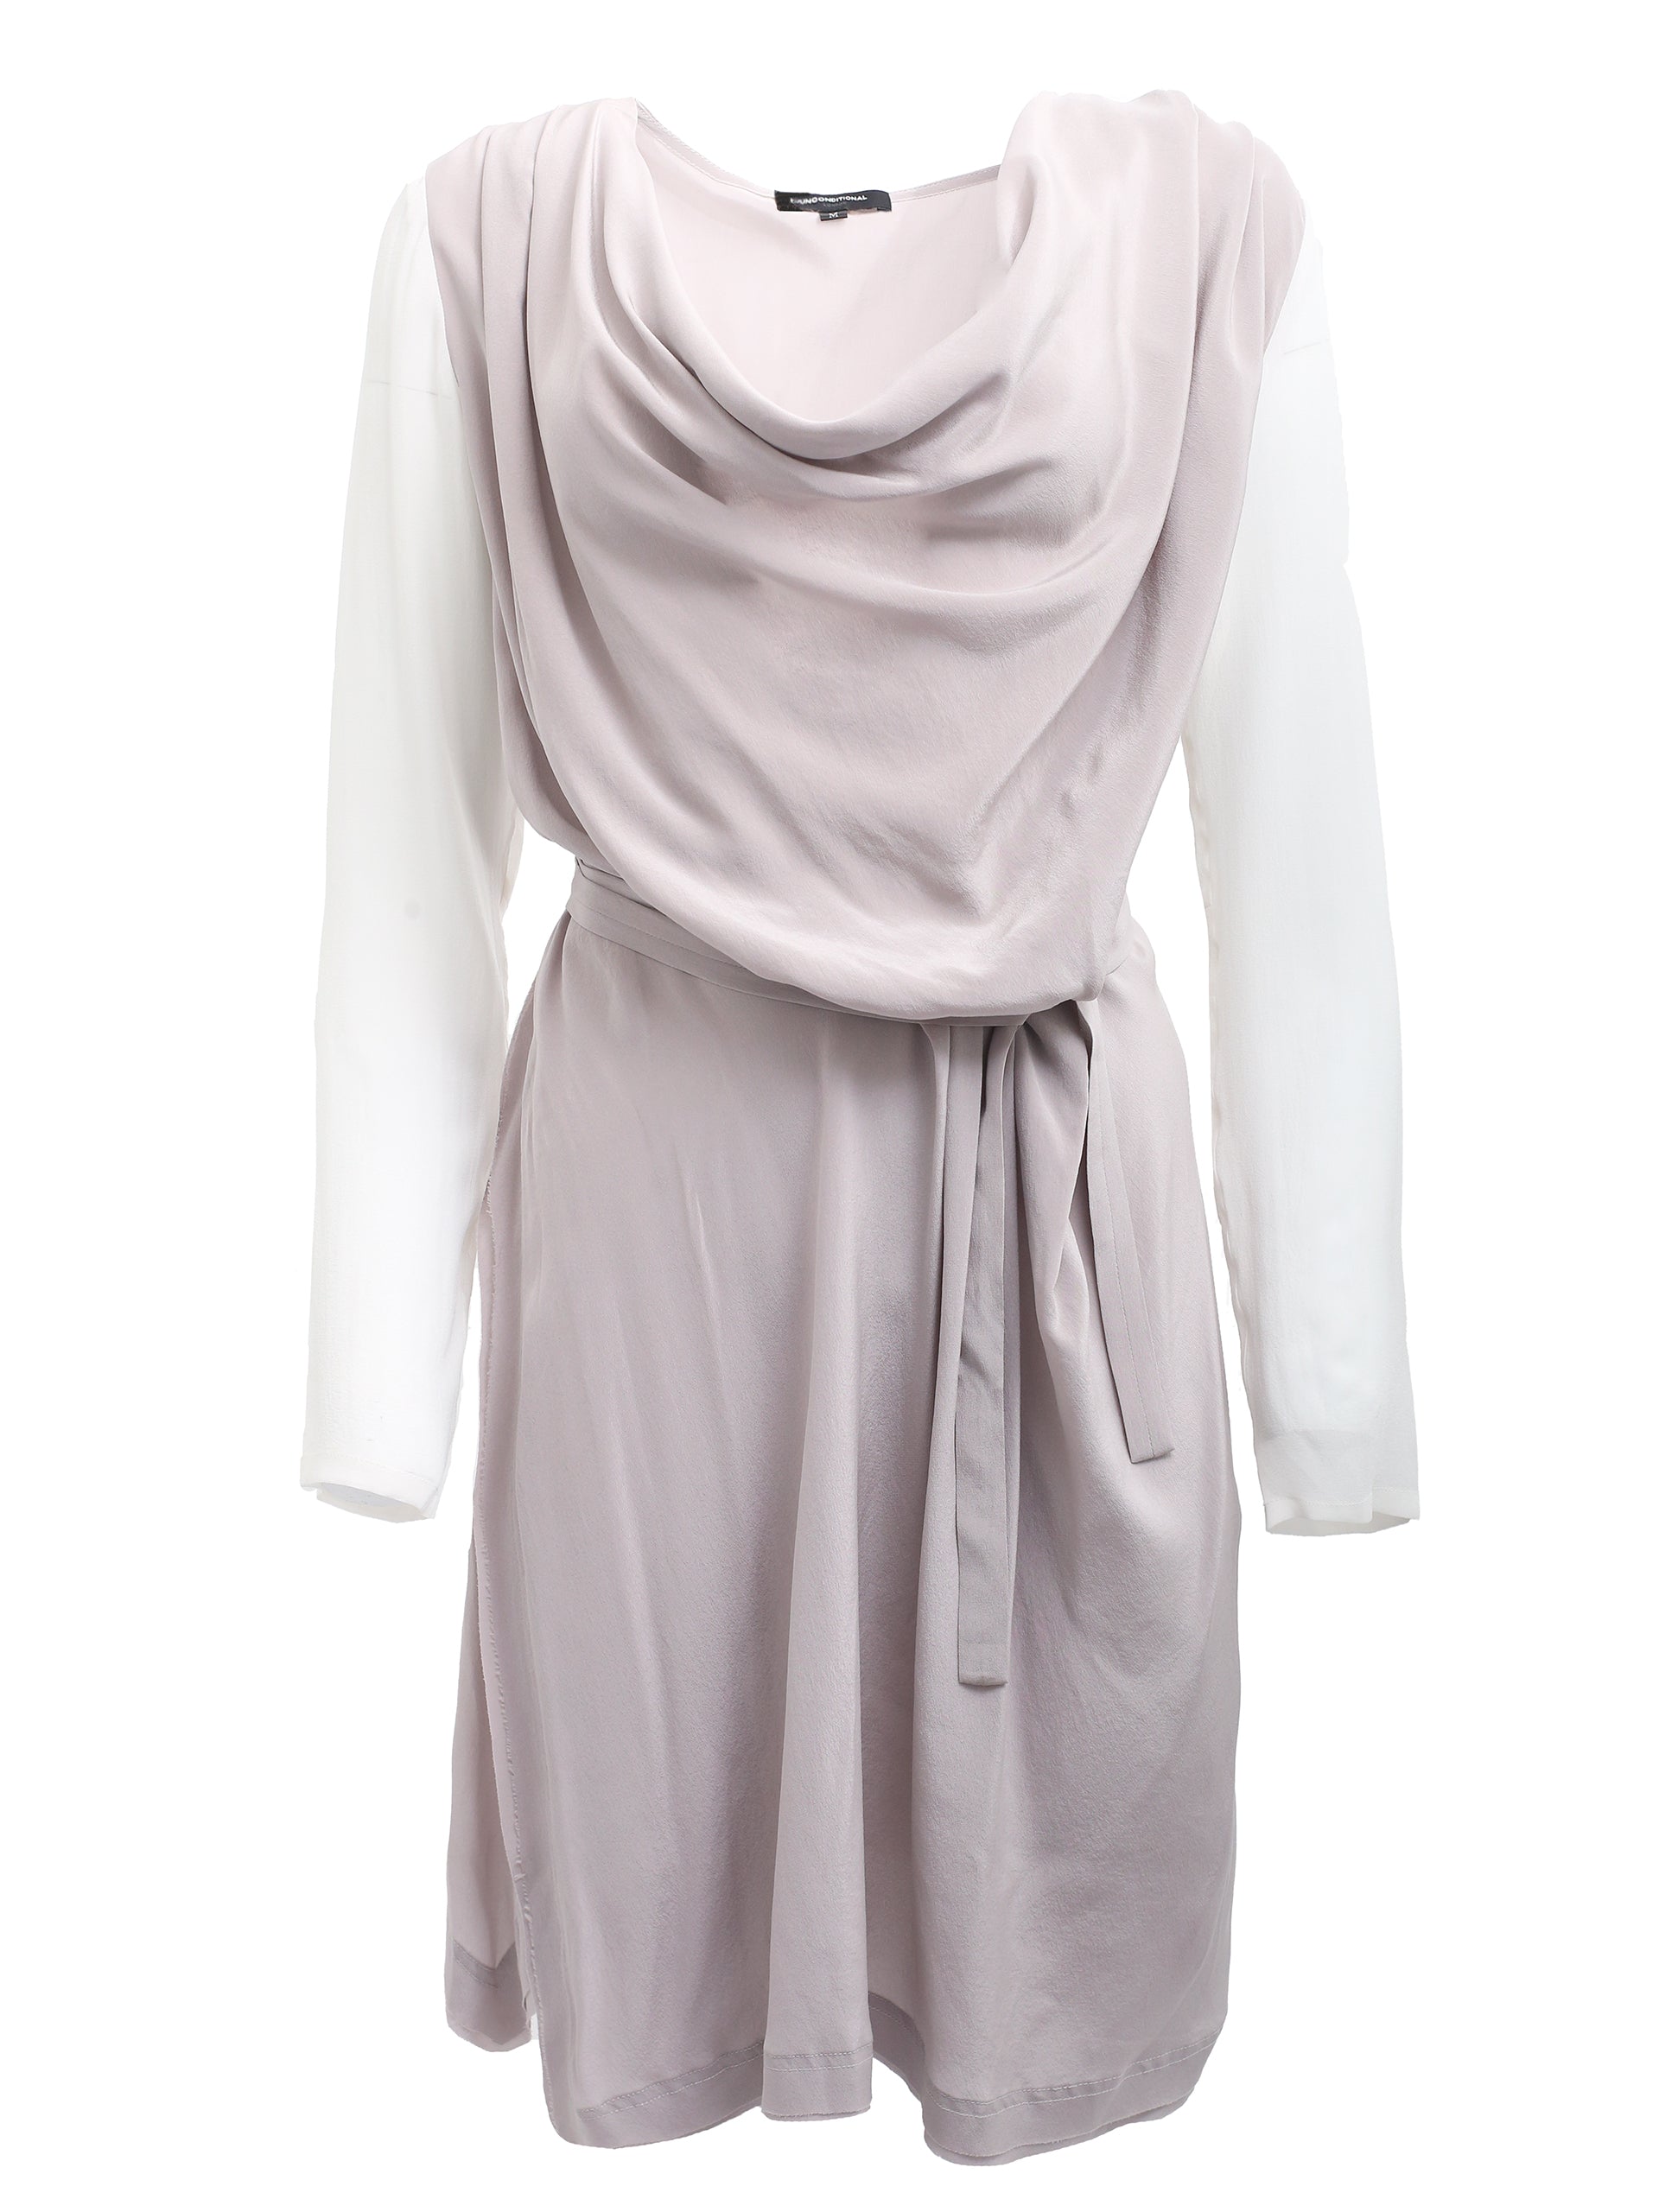 Taupe Dress With White Sleeves